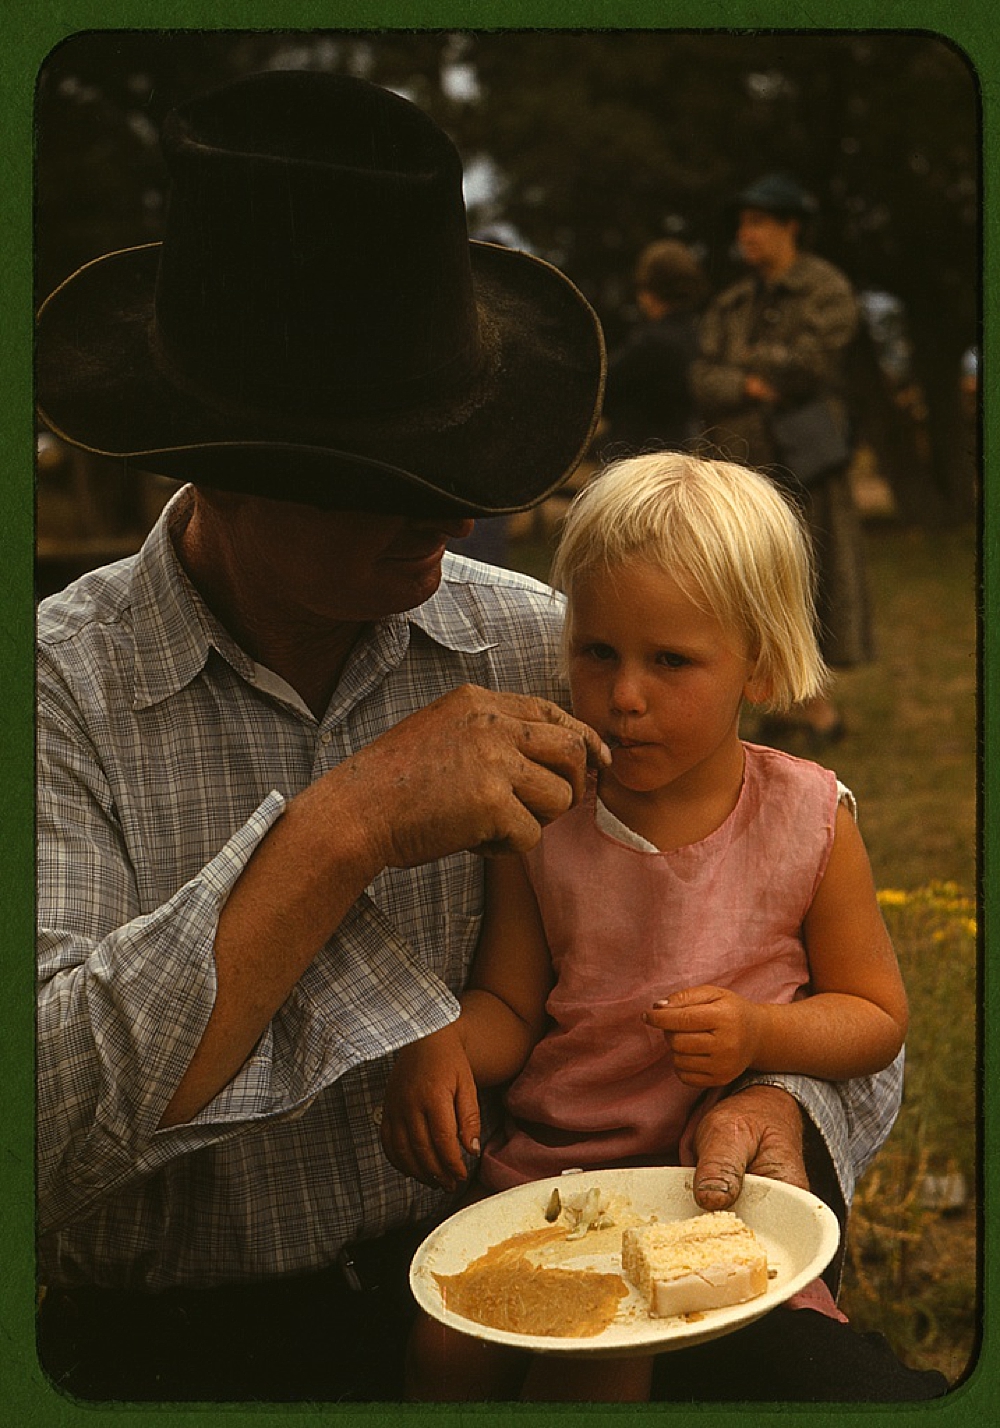 Homesteader feeding his daughter at the Pie Town